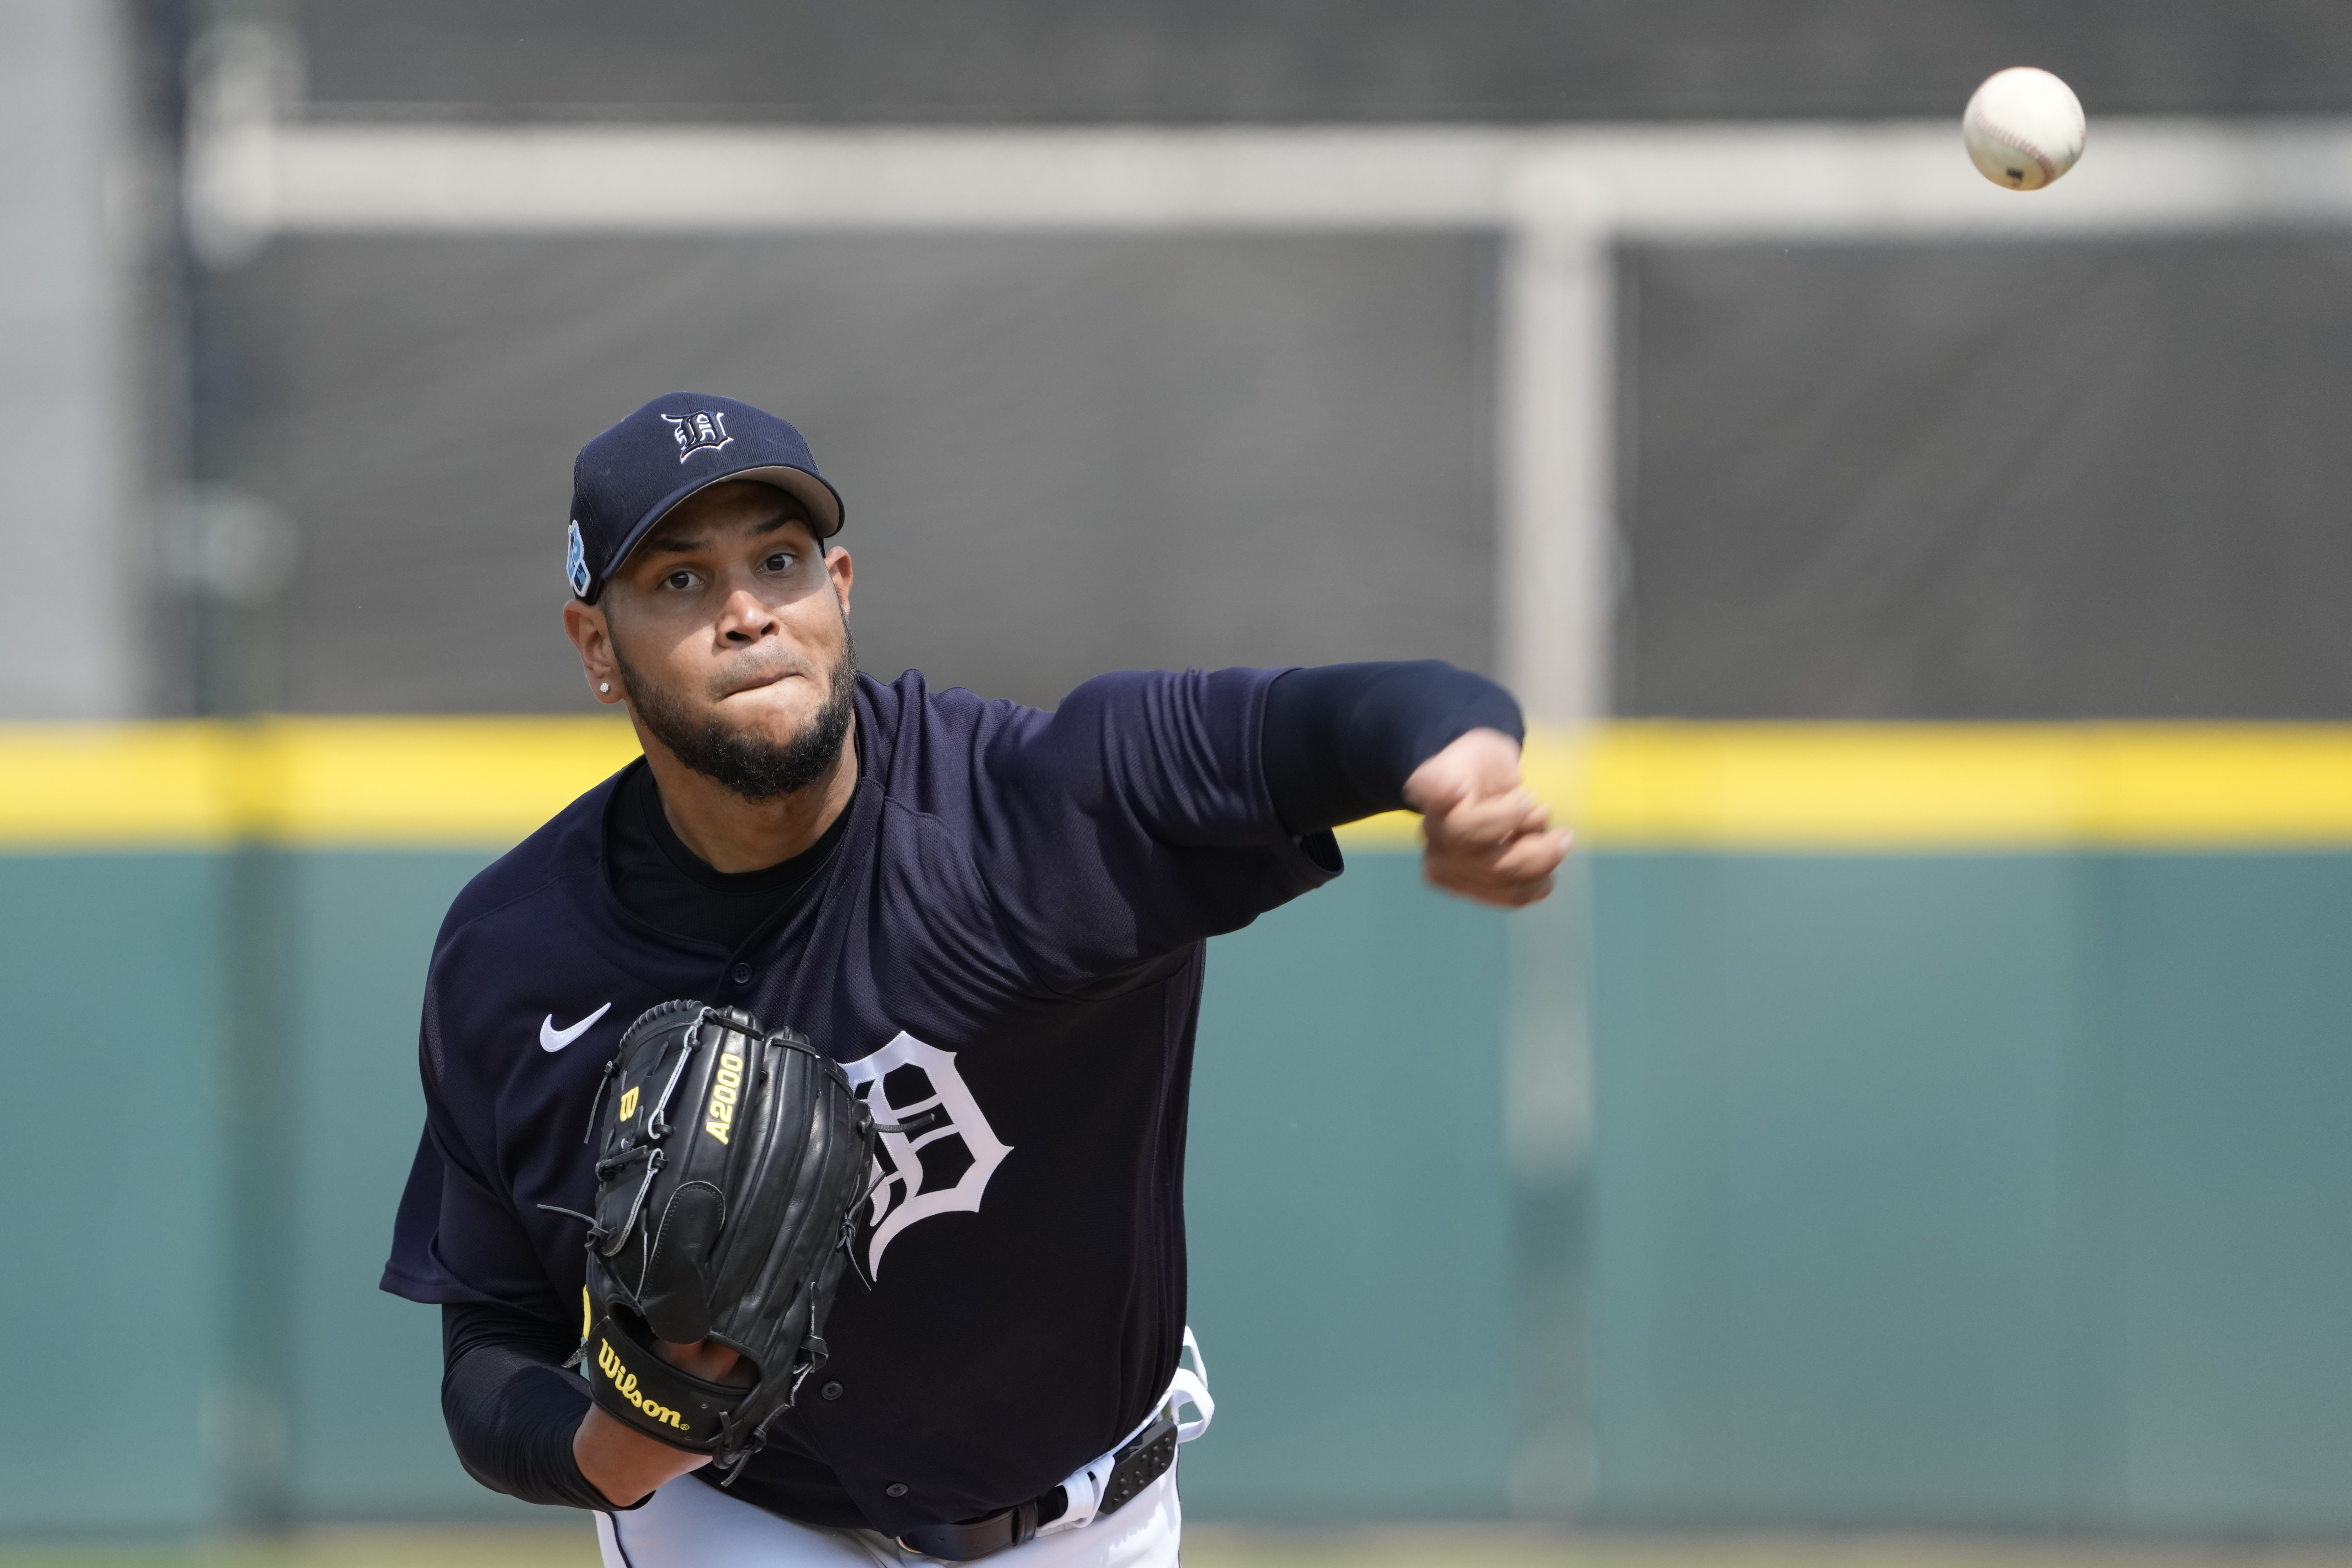 2023 Detroit Tigers O/U: Why the Tigers Will Hit the OVER - LWOSports